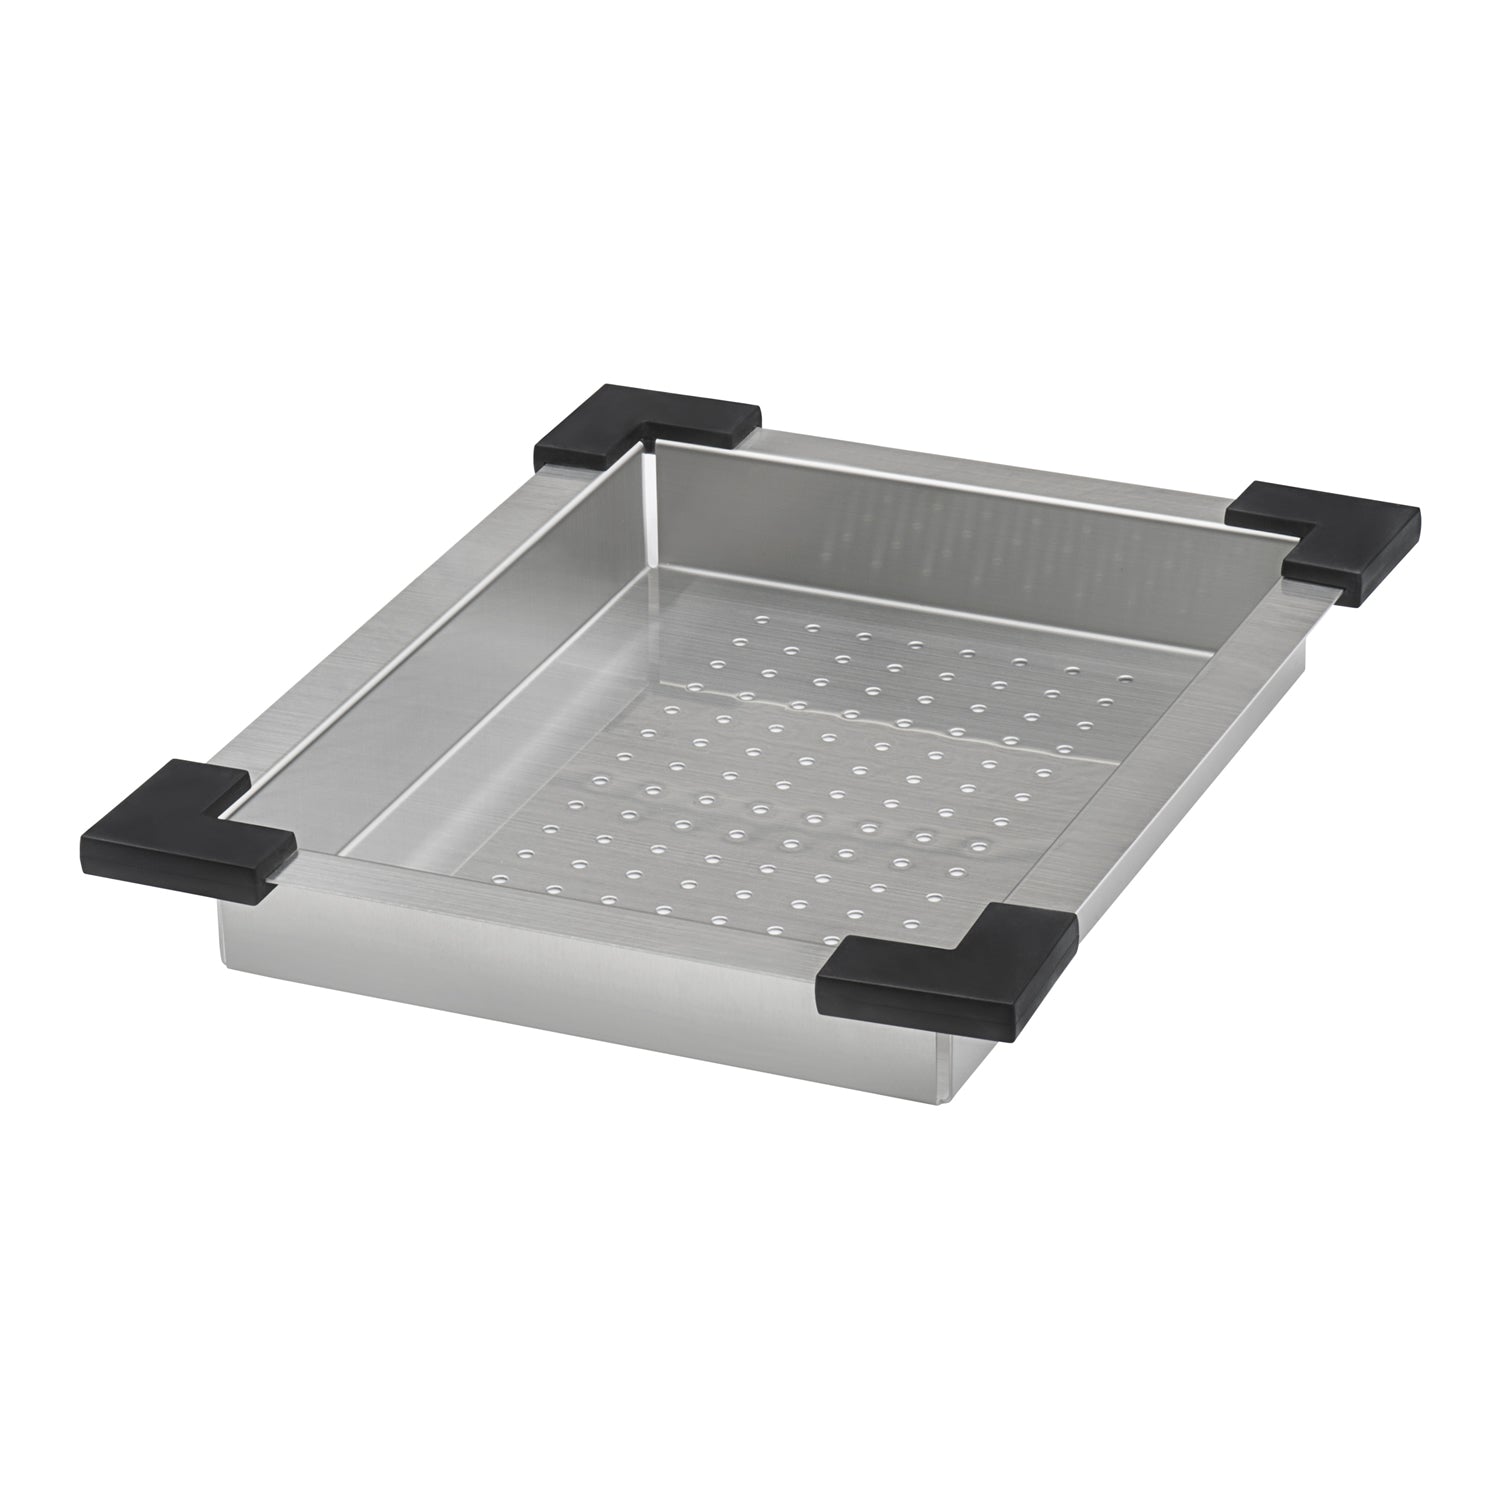 Lower-Tier Shallow Colander for Double Ledge Workstation Sinks